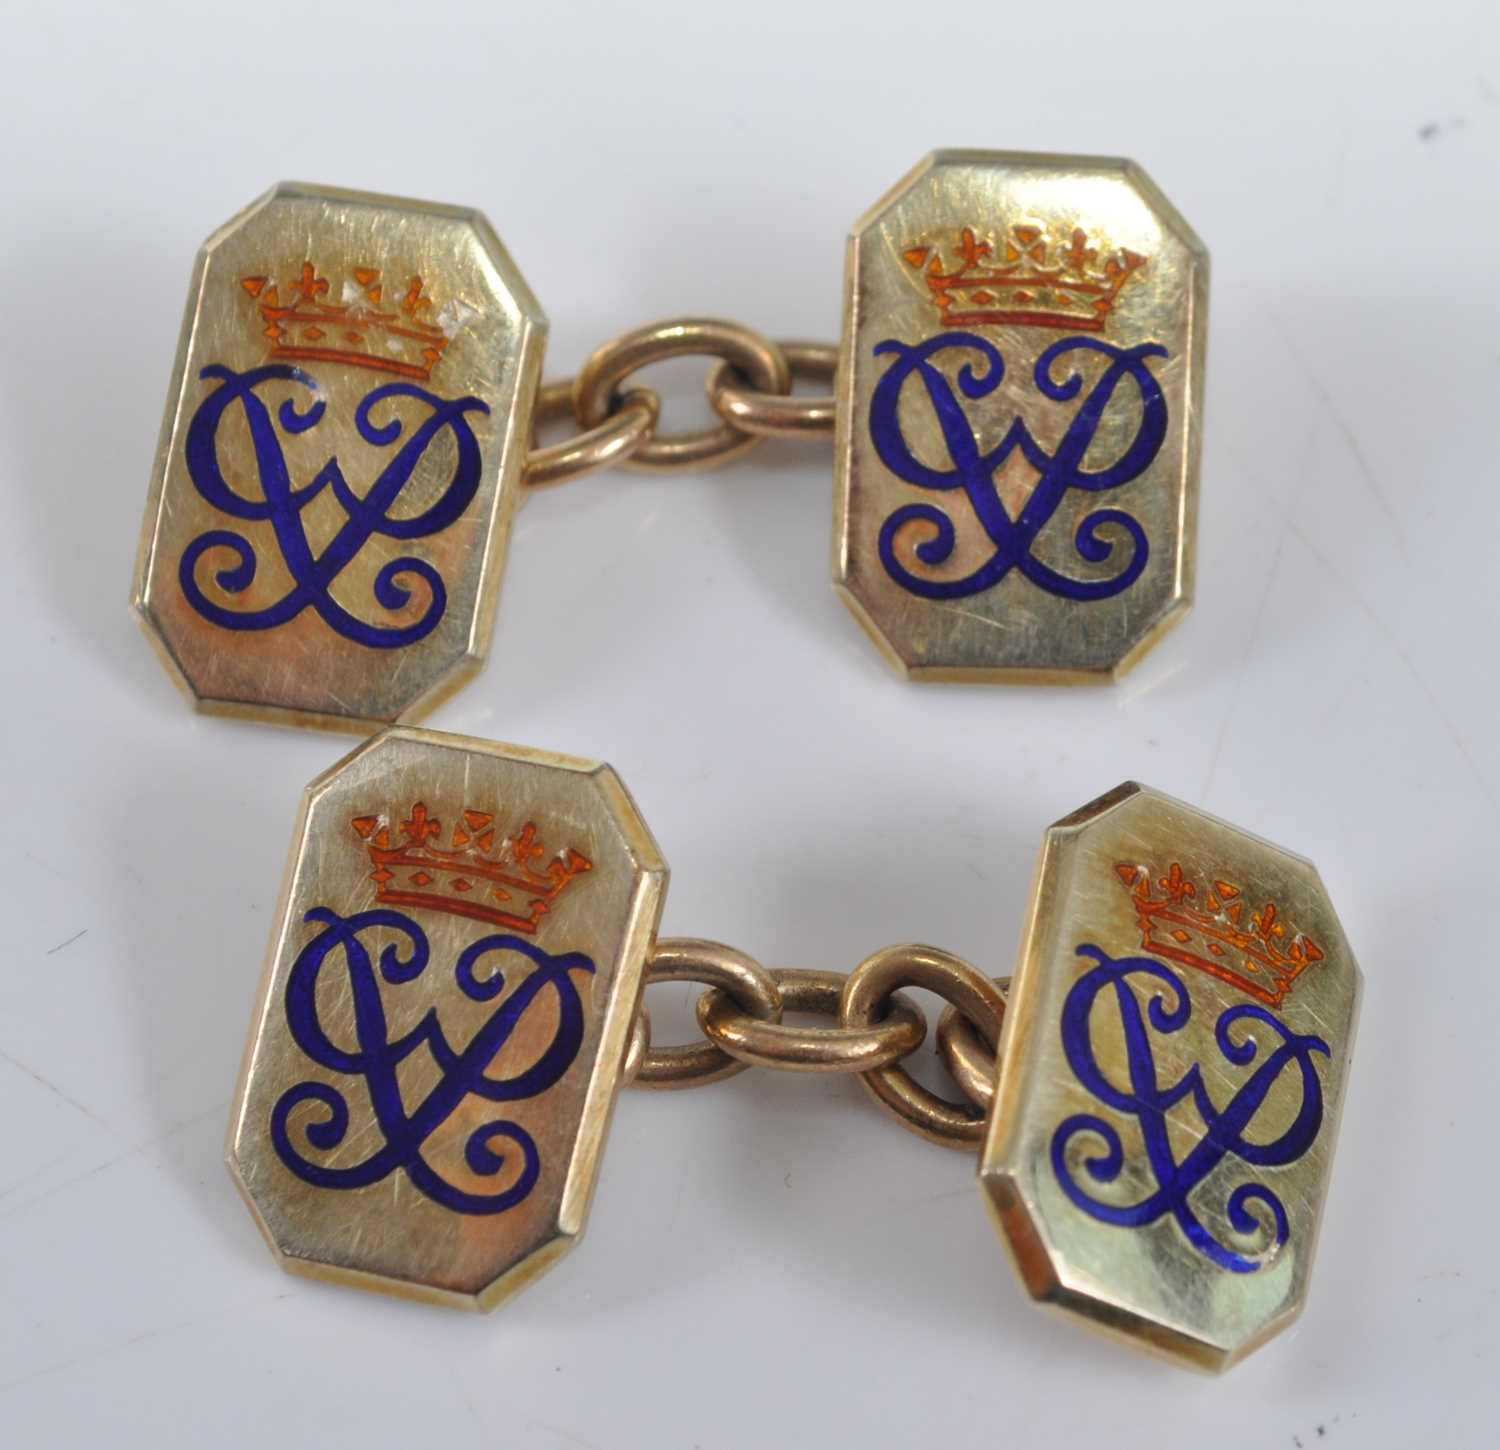 A pair of 9ct yellow gold double-ended cufflinks, each featuring a 15 x 10mm octagonal plate